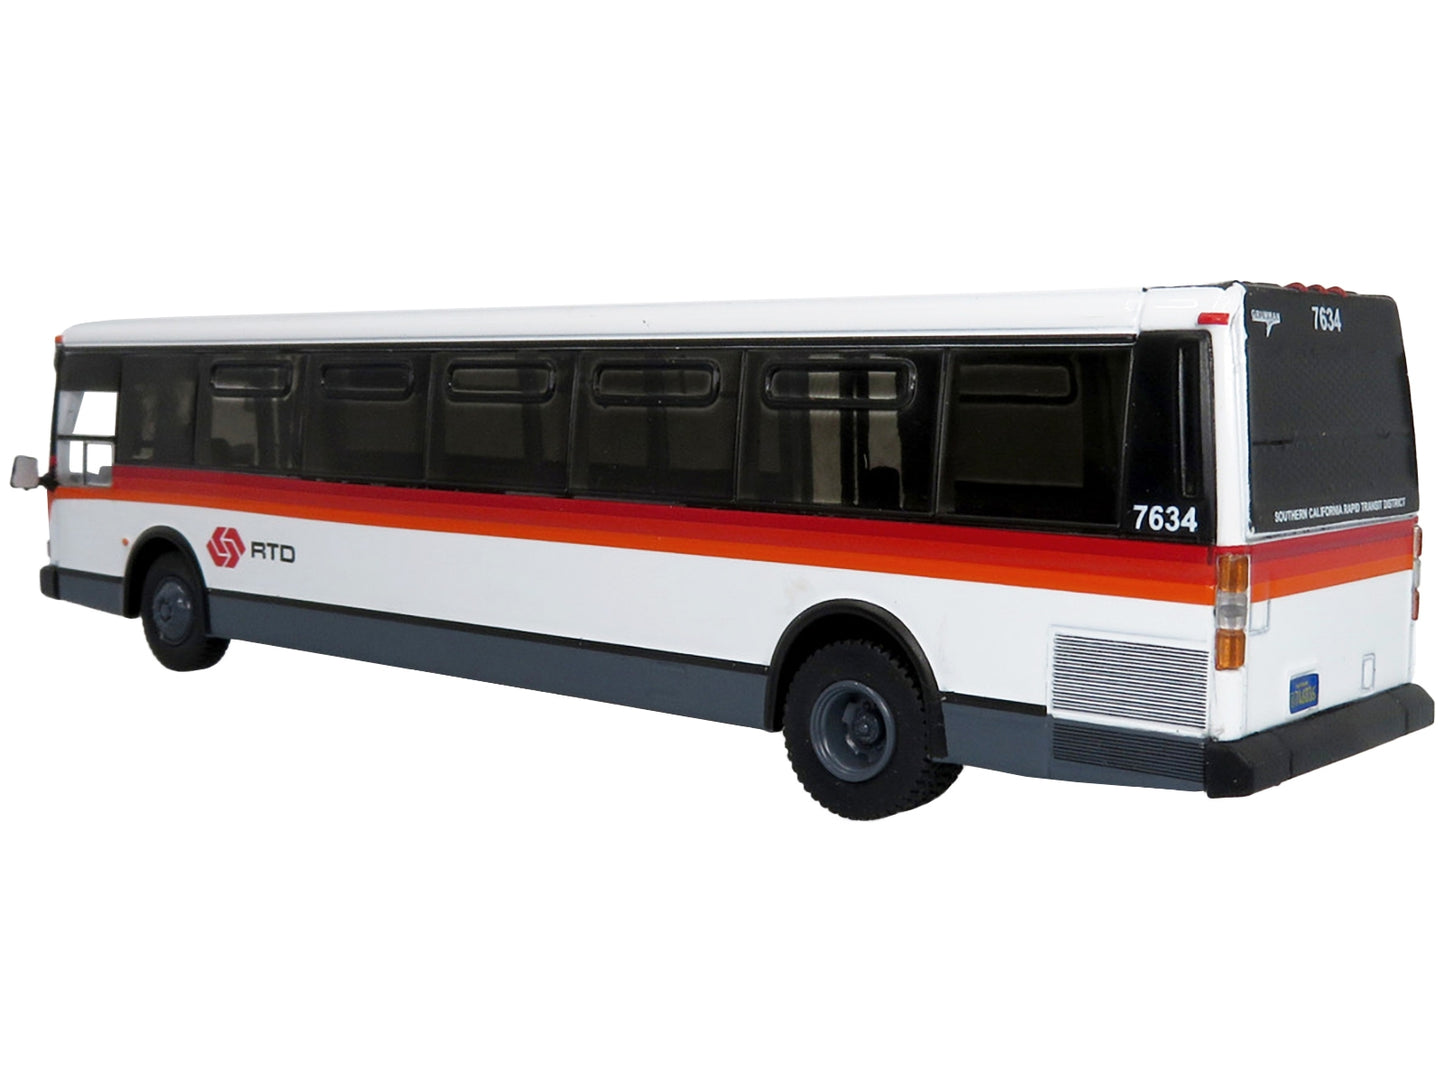 1980 Grumman 870 Advanced Design Transit Bus Southern California Rapid Transit District "485 Los Angeles" "Vintage Bus & Motorcoach Collection" 1/87 Diecast Model by Iconic Replicas